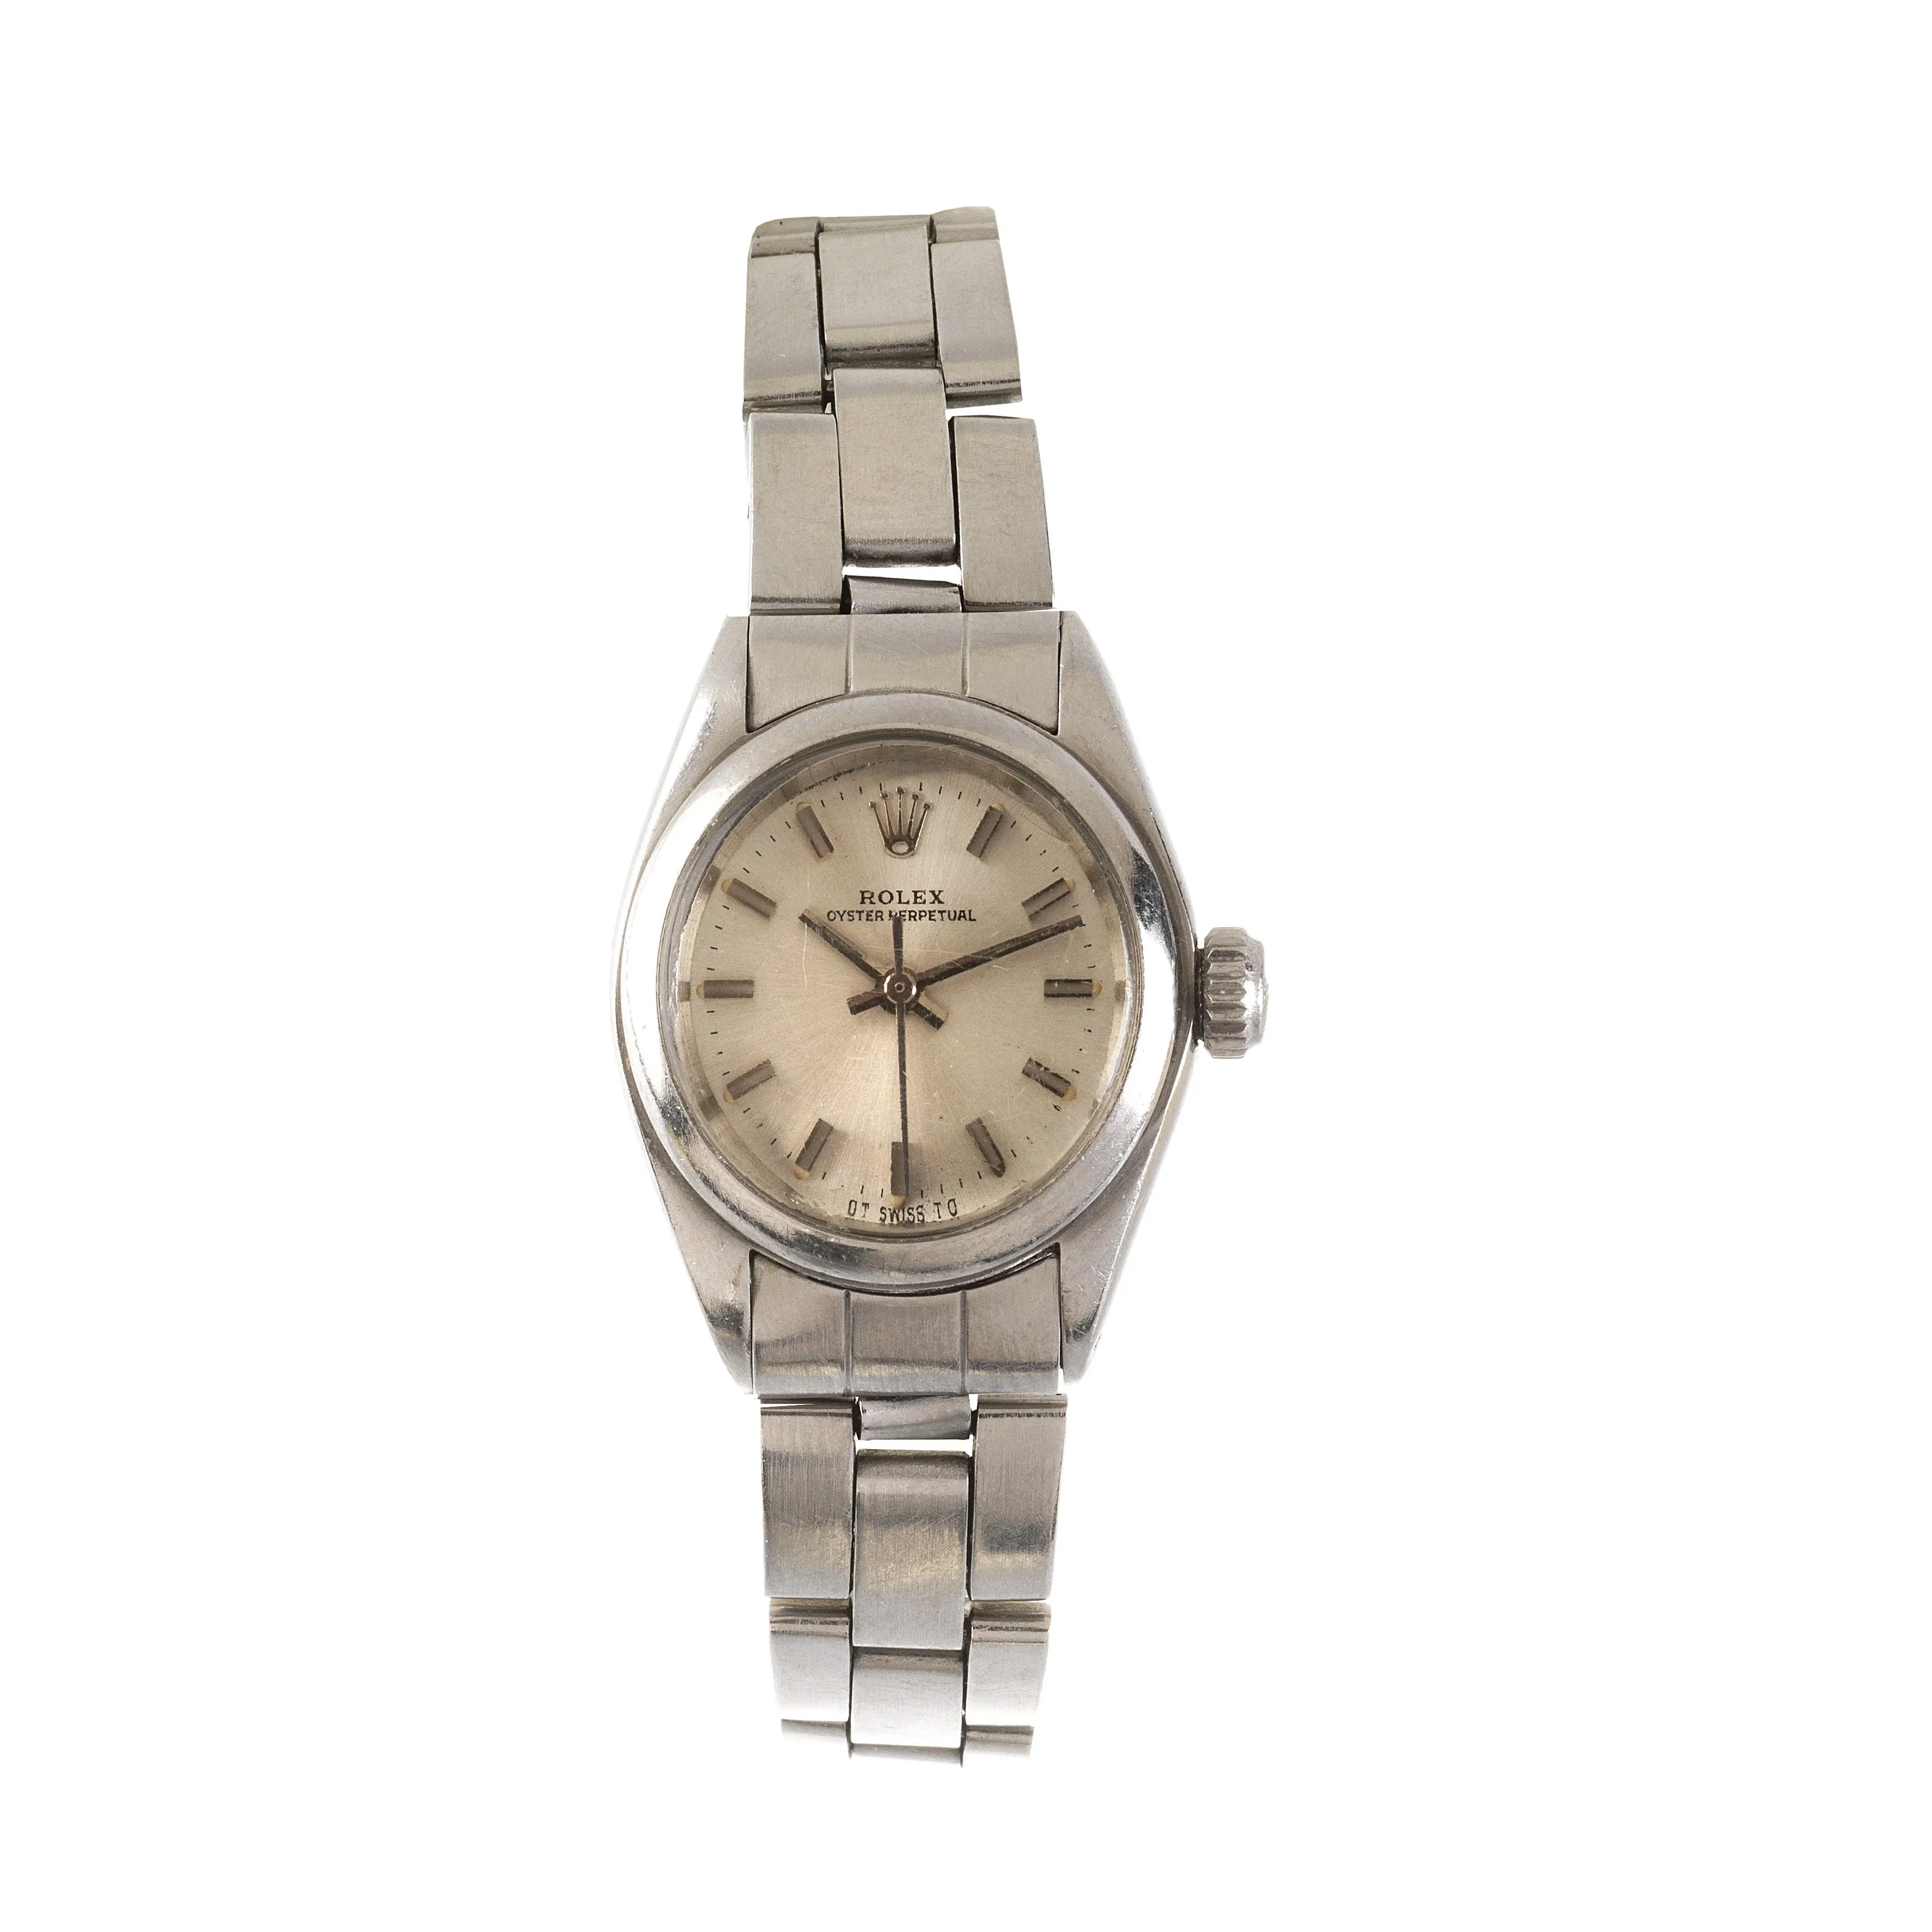 Rolex Oyster Perpetual 26 6718